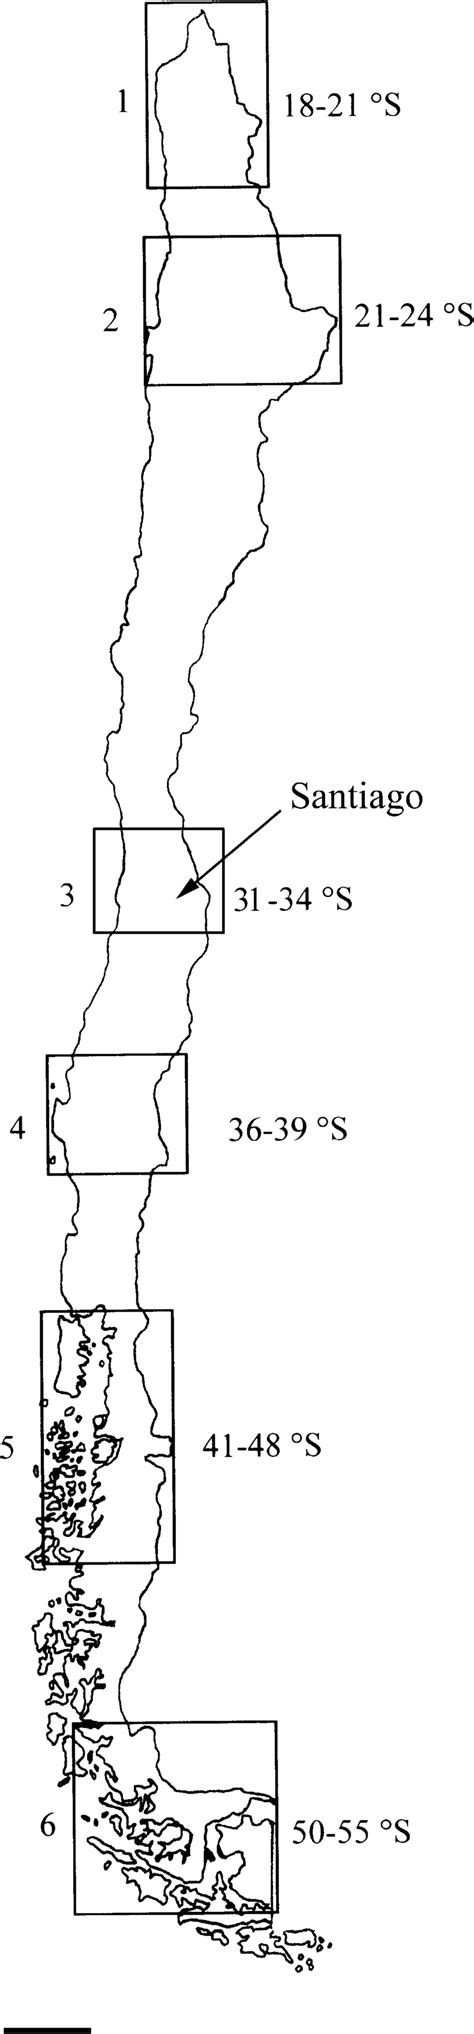 Zones 1 6 In Chile Including Approximate Latitudes From Where Soil